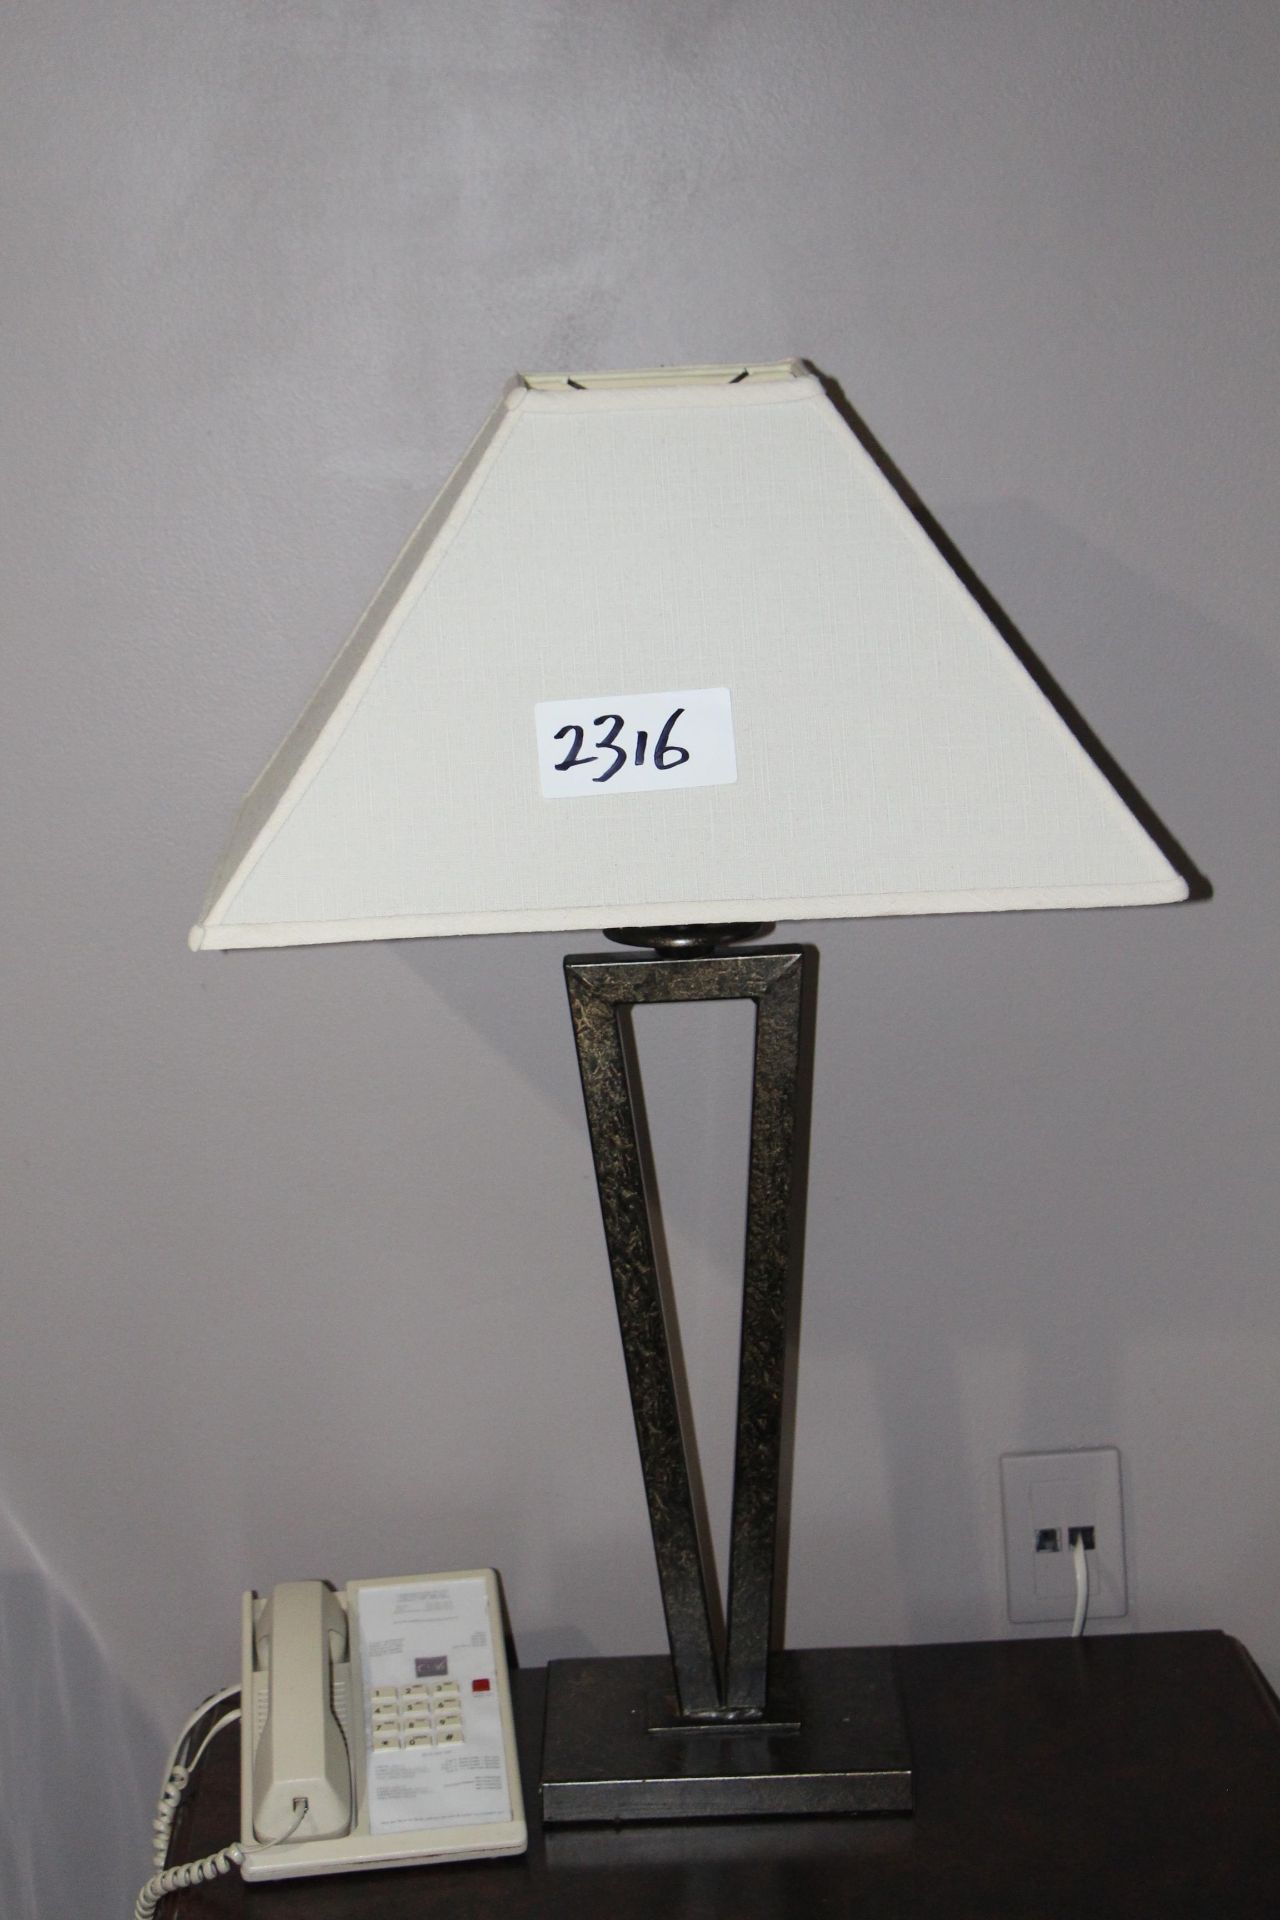 Wrought iron table lamp w/ linen shade